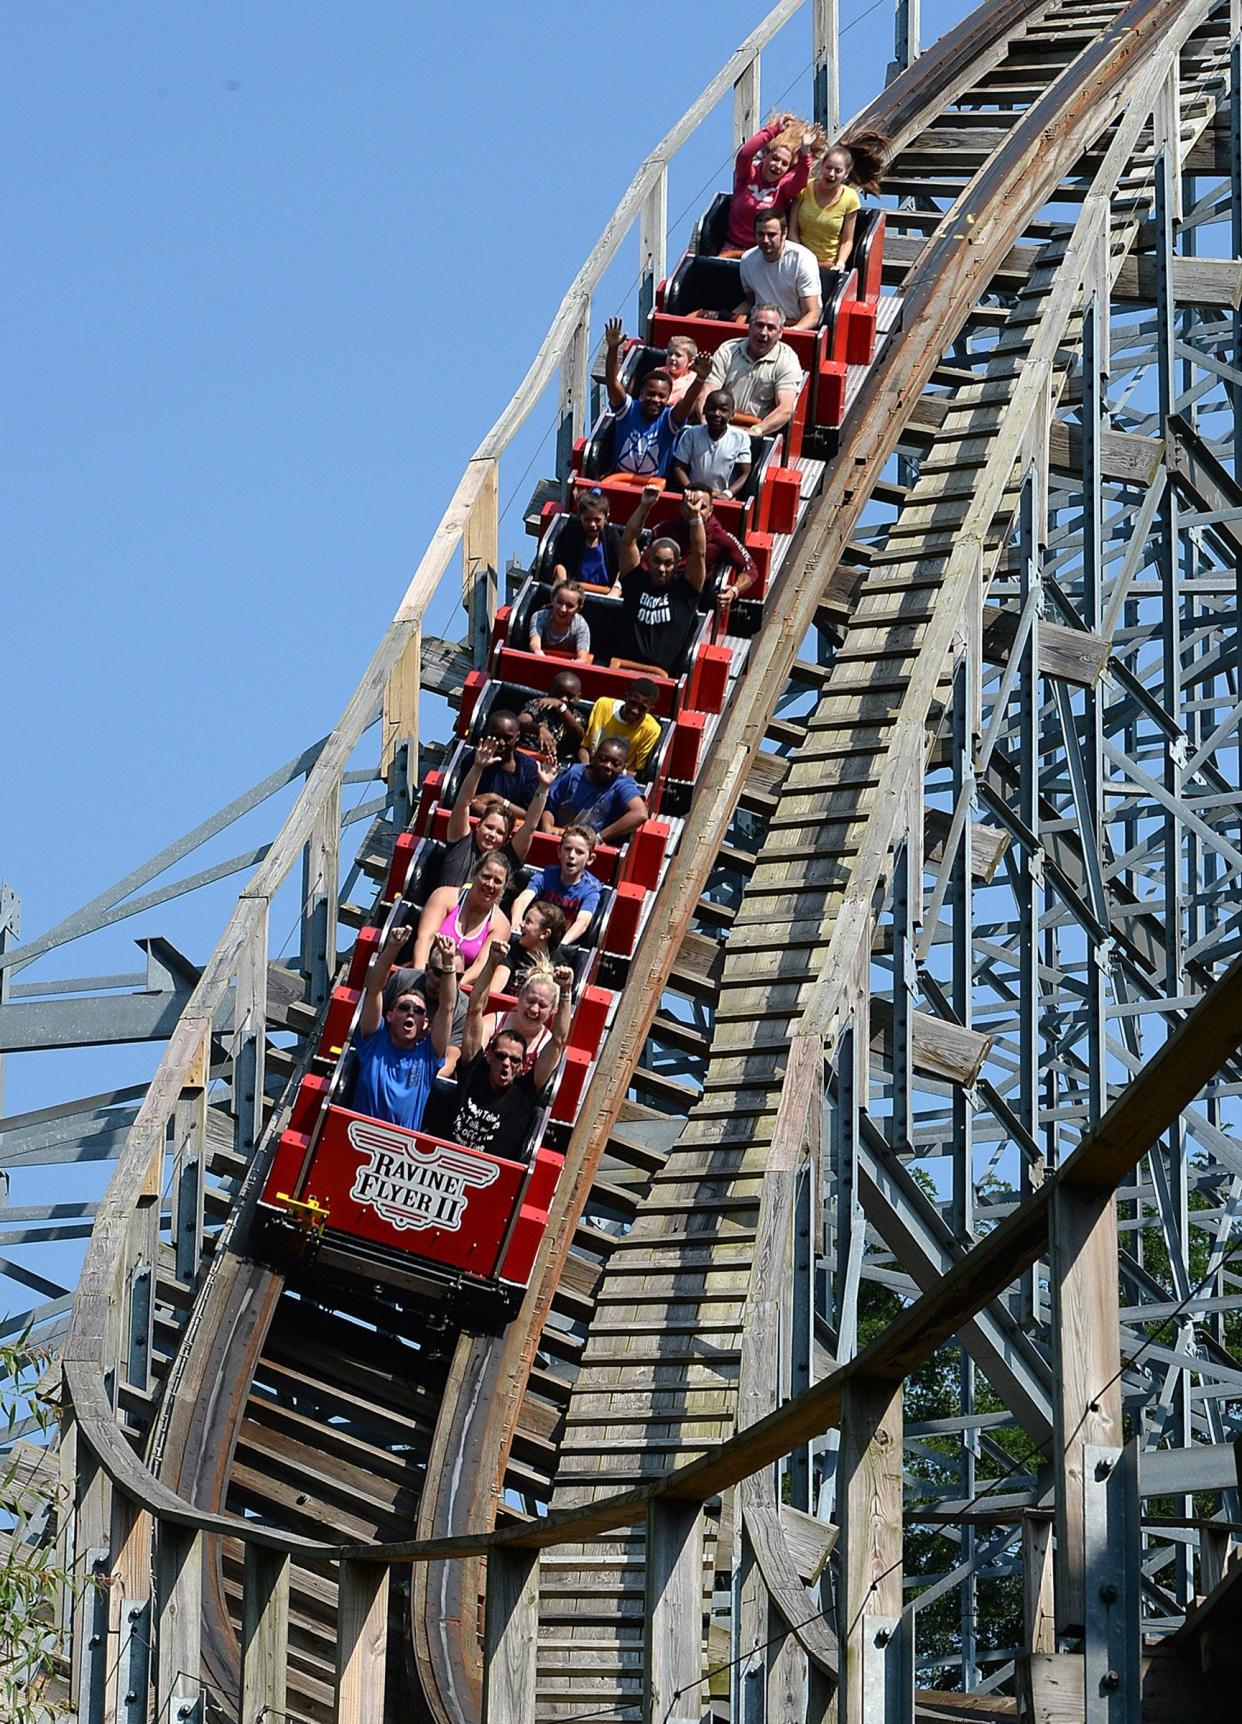 Patrons at Waldameer Park & Water World are shown riding the Ravine Flyer II in this 2017 file photo.